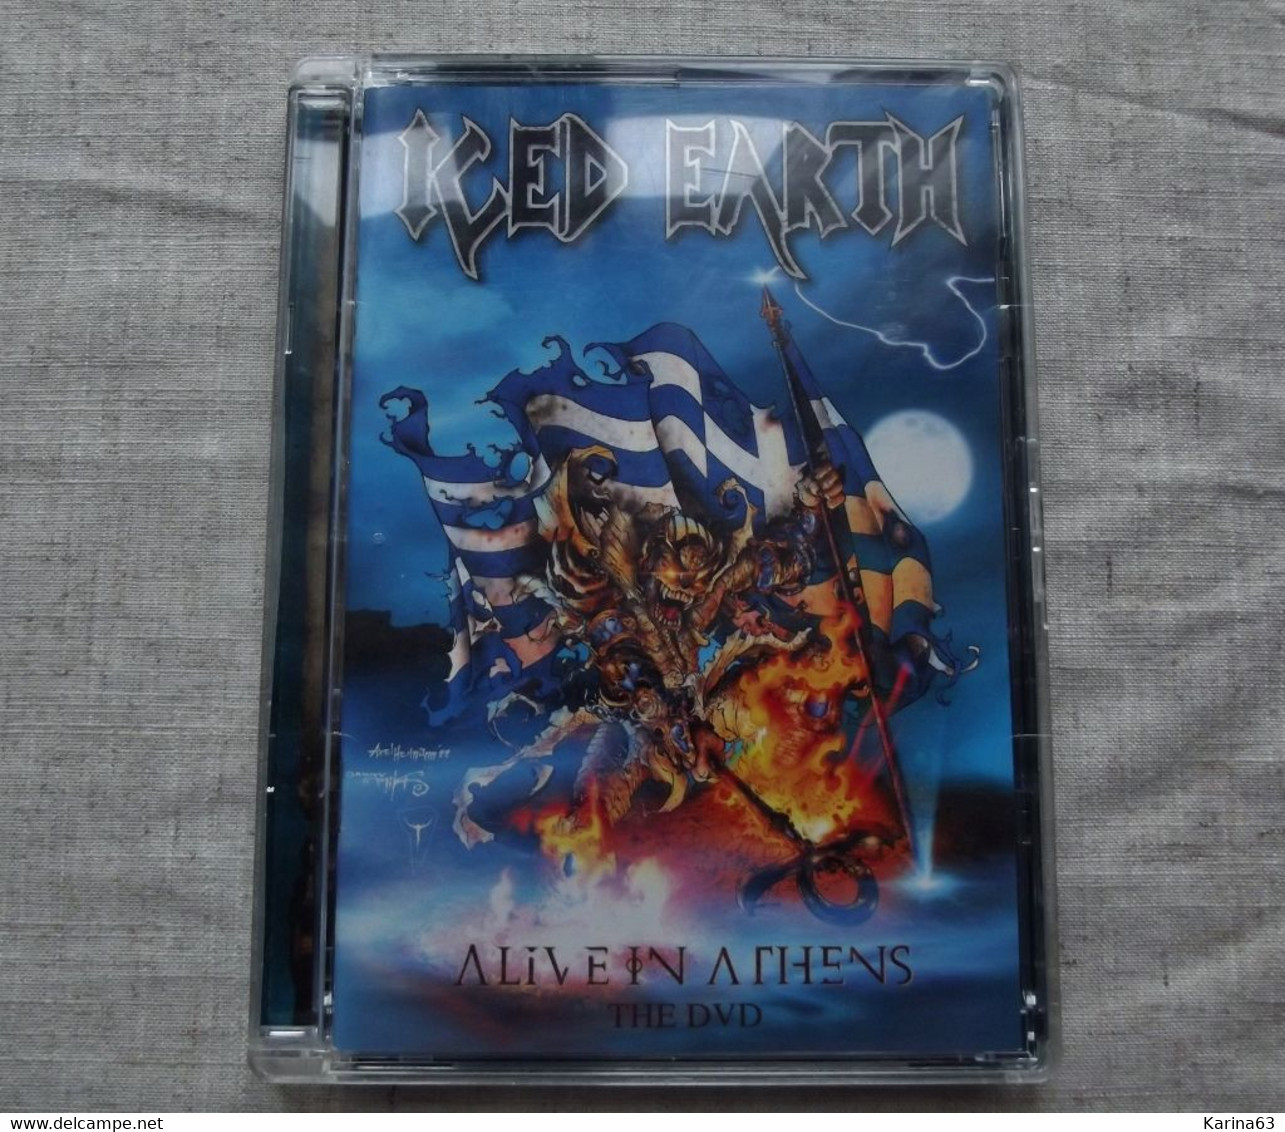 Iced Earth - Alive In Athens - 2007 - Music On DVD